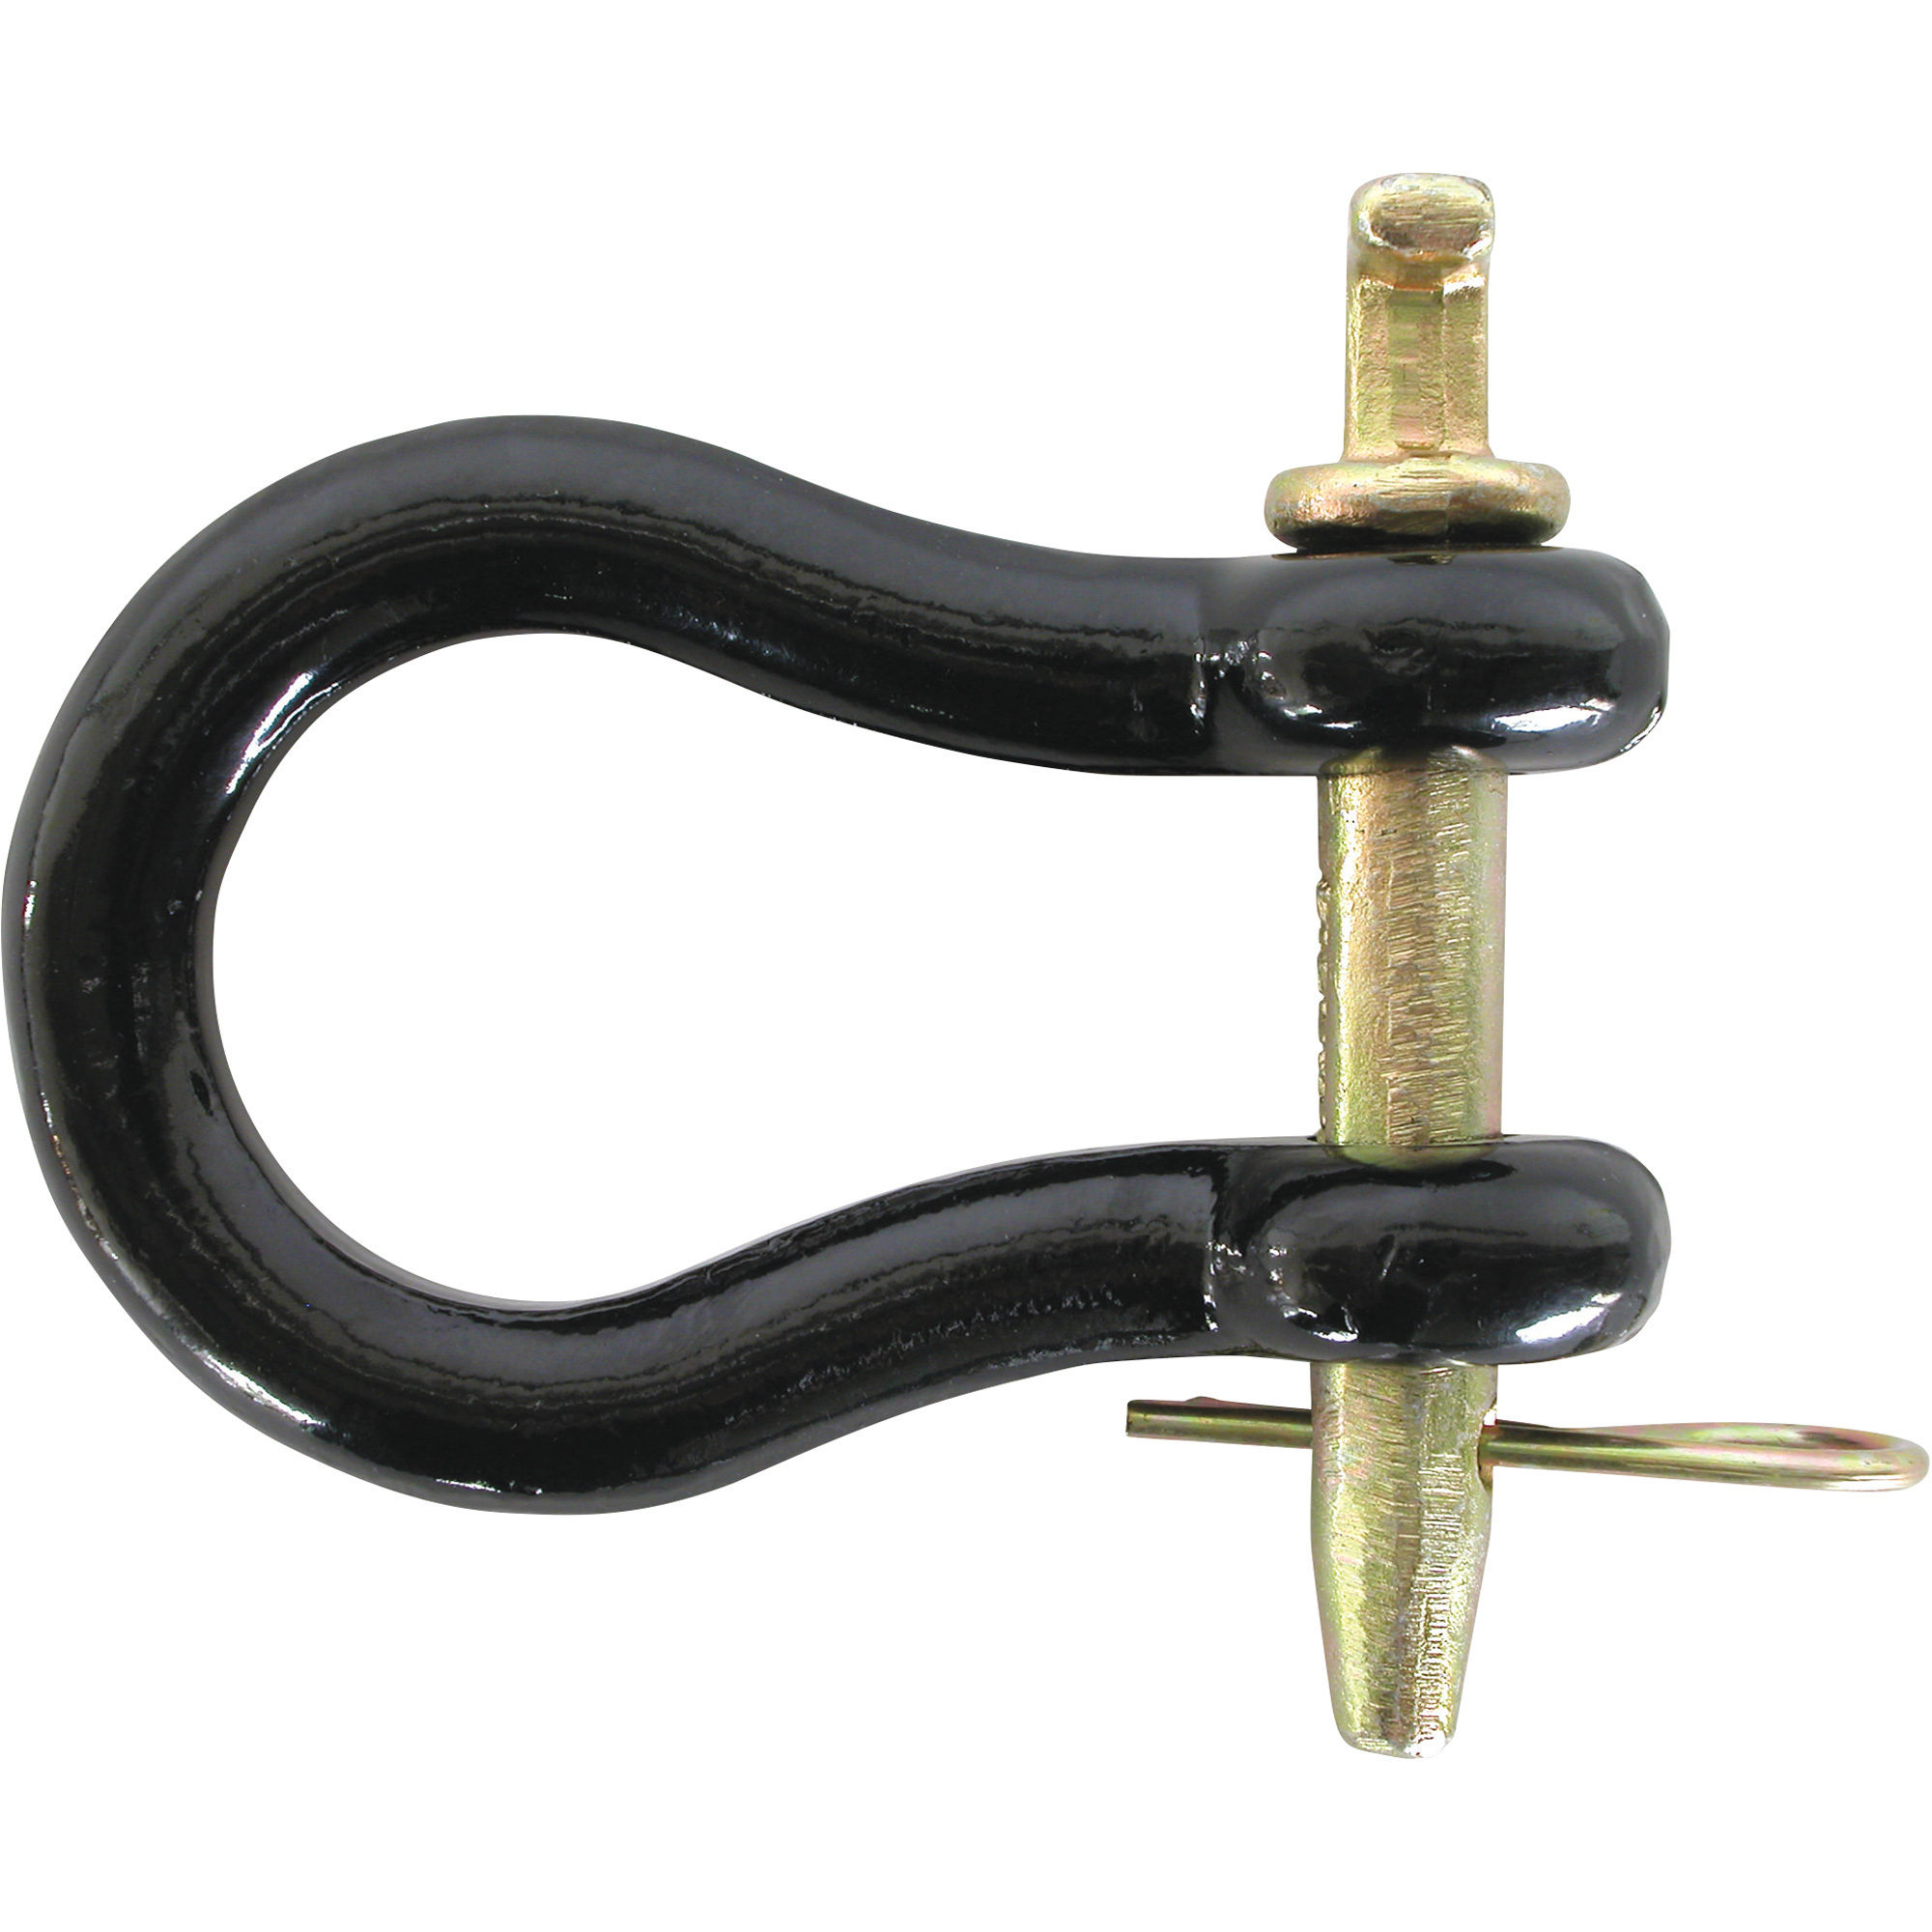 Braber Equipment Straight Clevis, 3/4Inch x 3-3/4Inch, Model 64.300.075